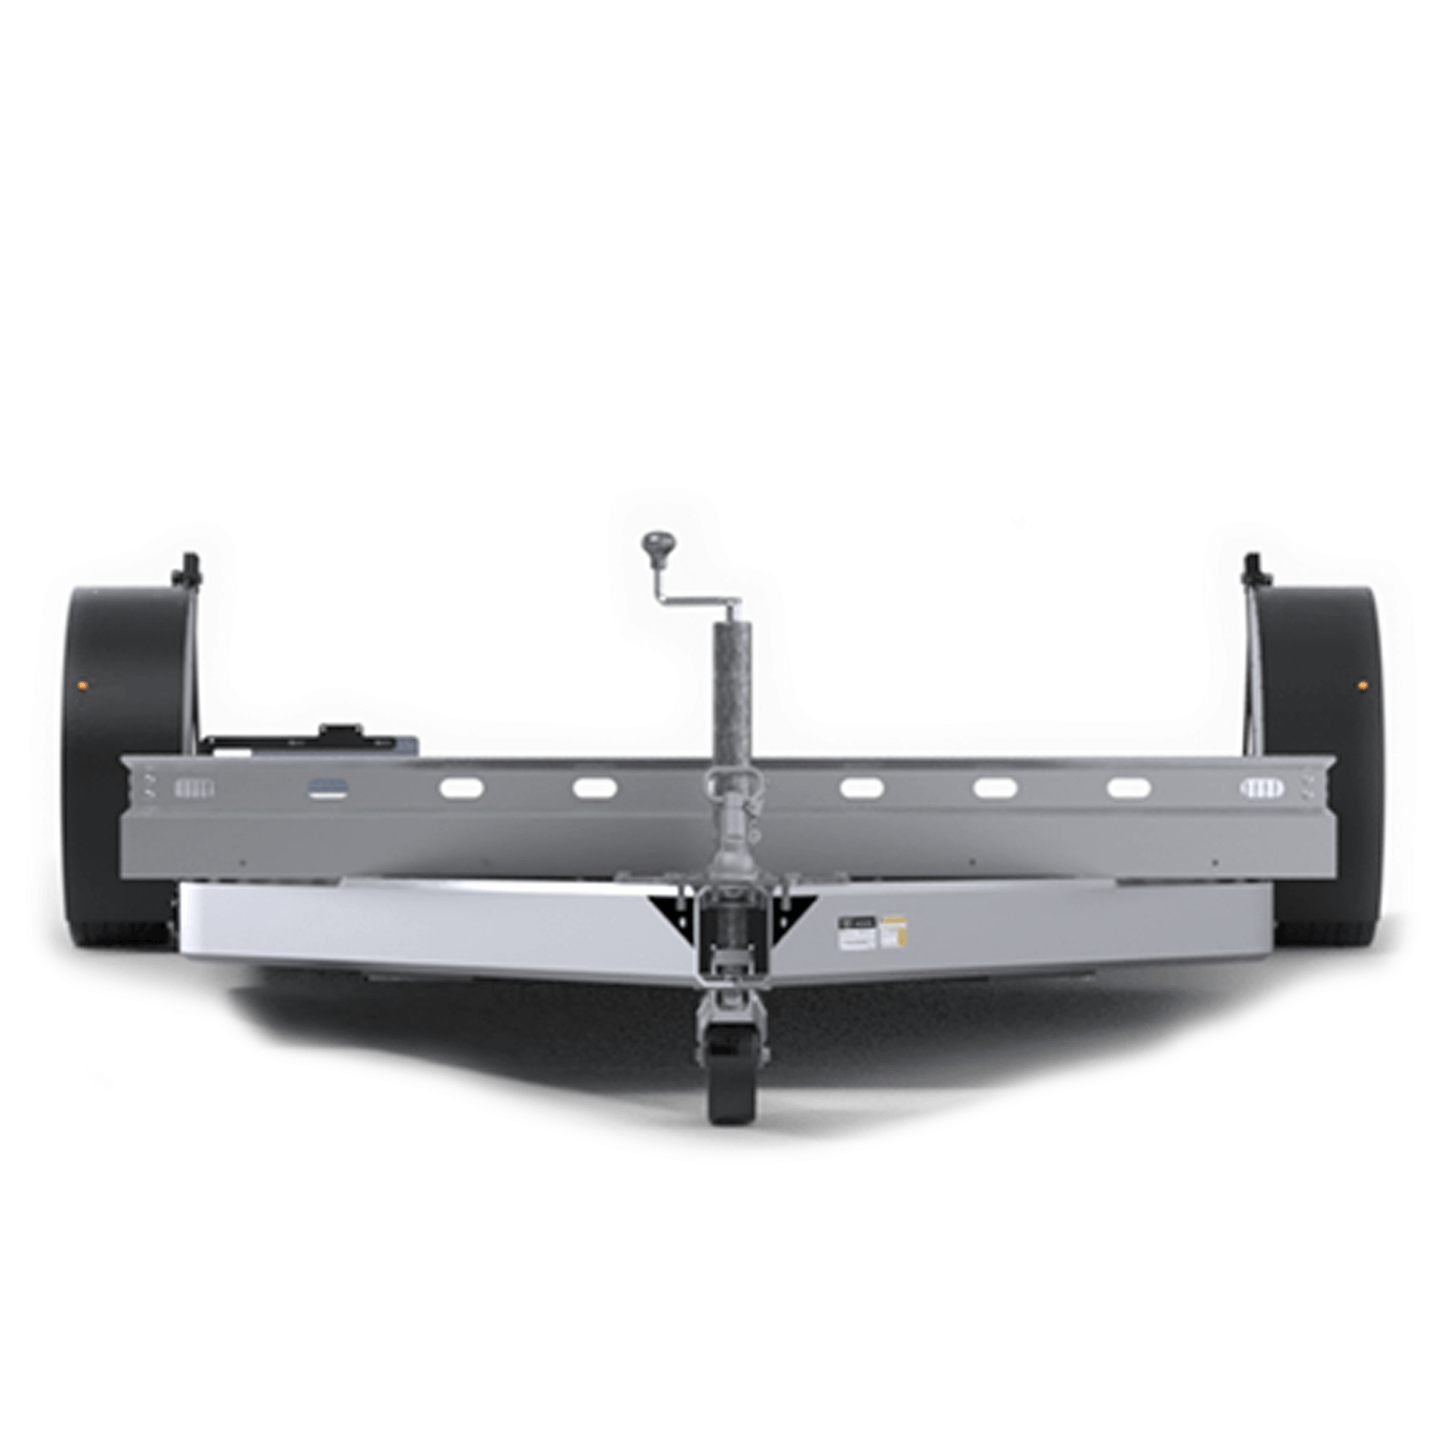 Club Sport Lowering Trailer from $13,995*